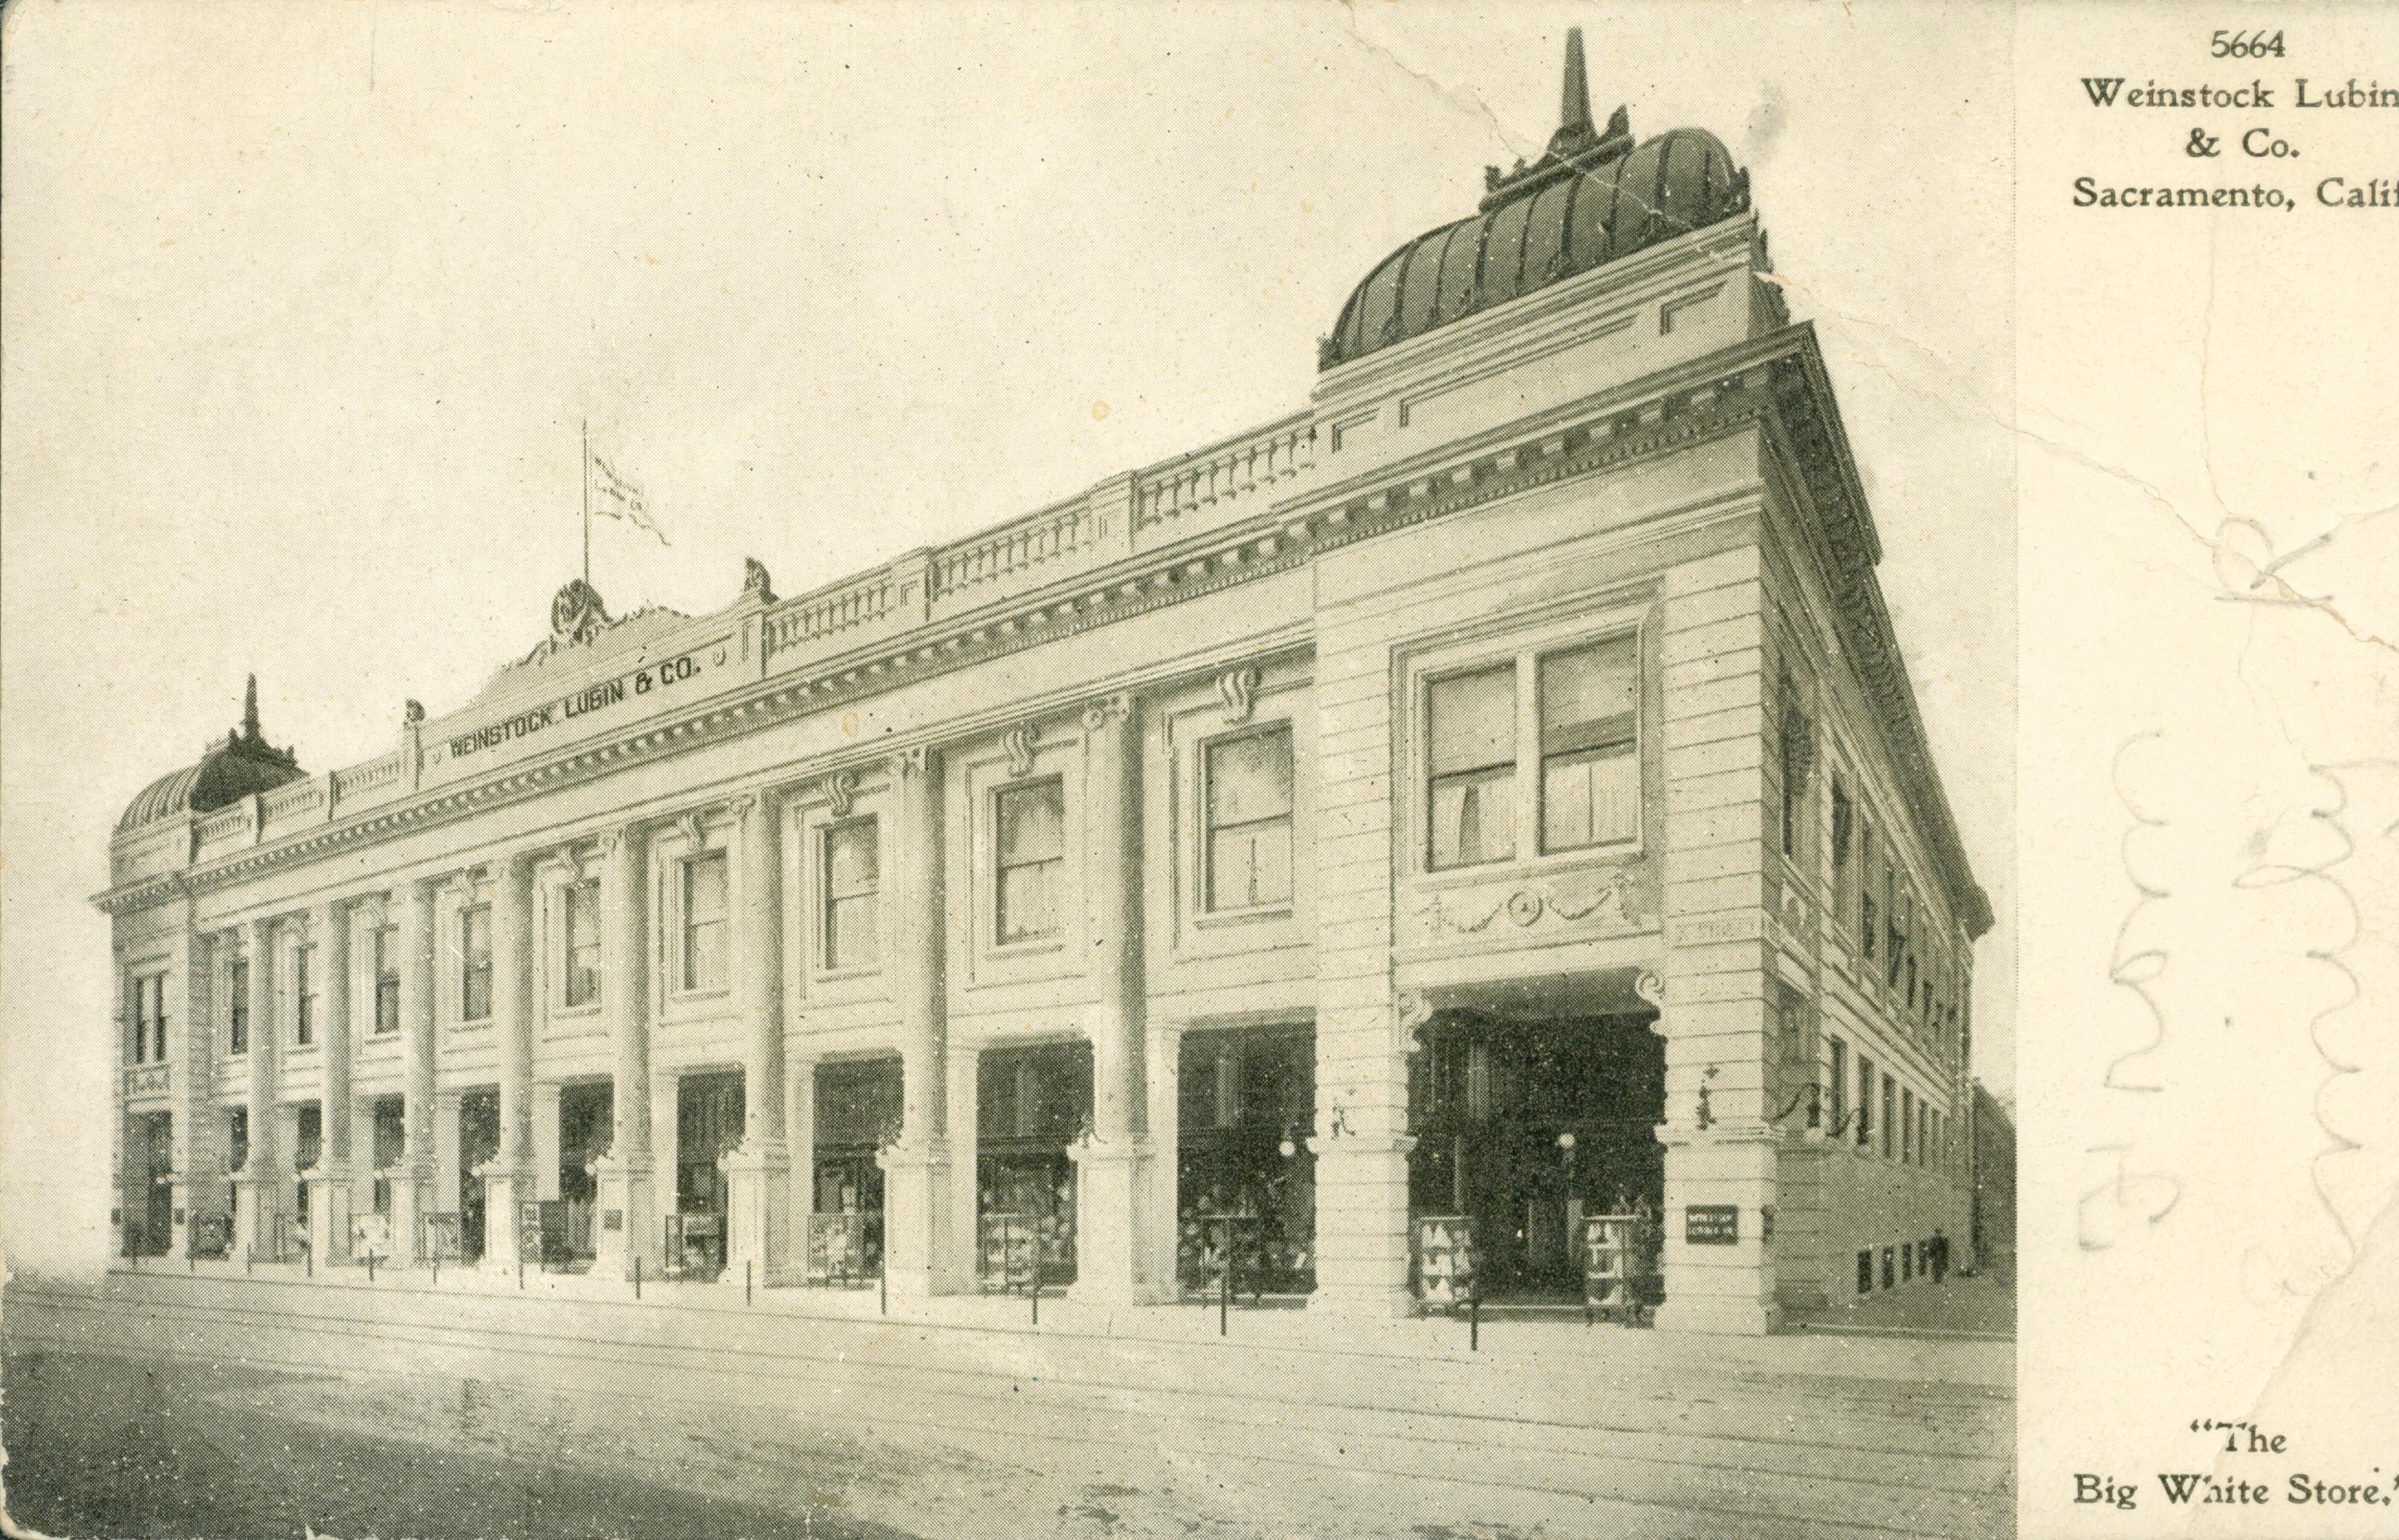 This postcard shows a corner view of the Weinstock Lubin & Co. building in Sacramento